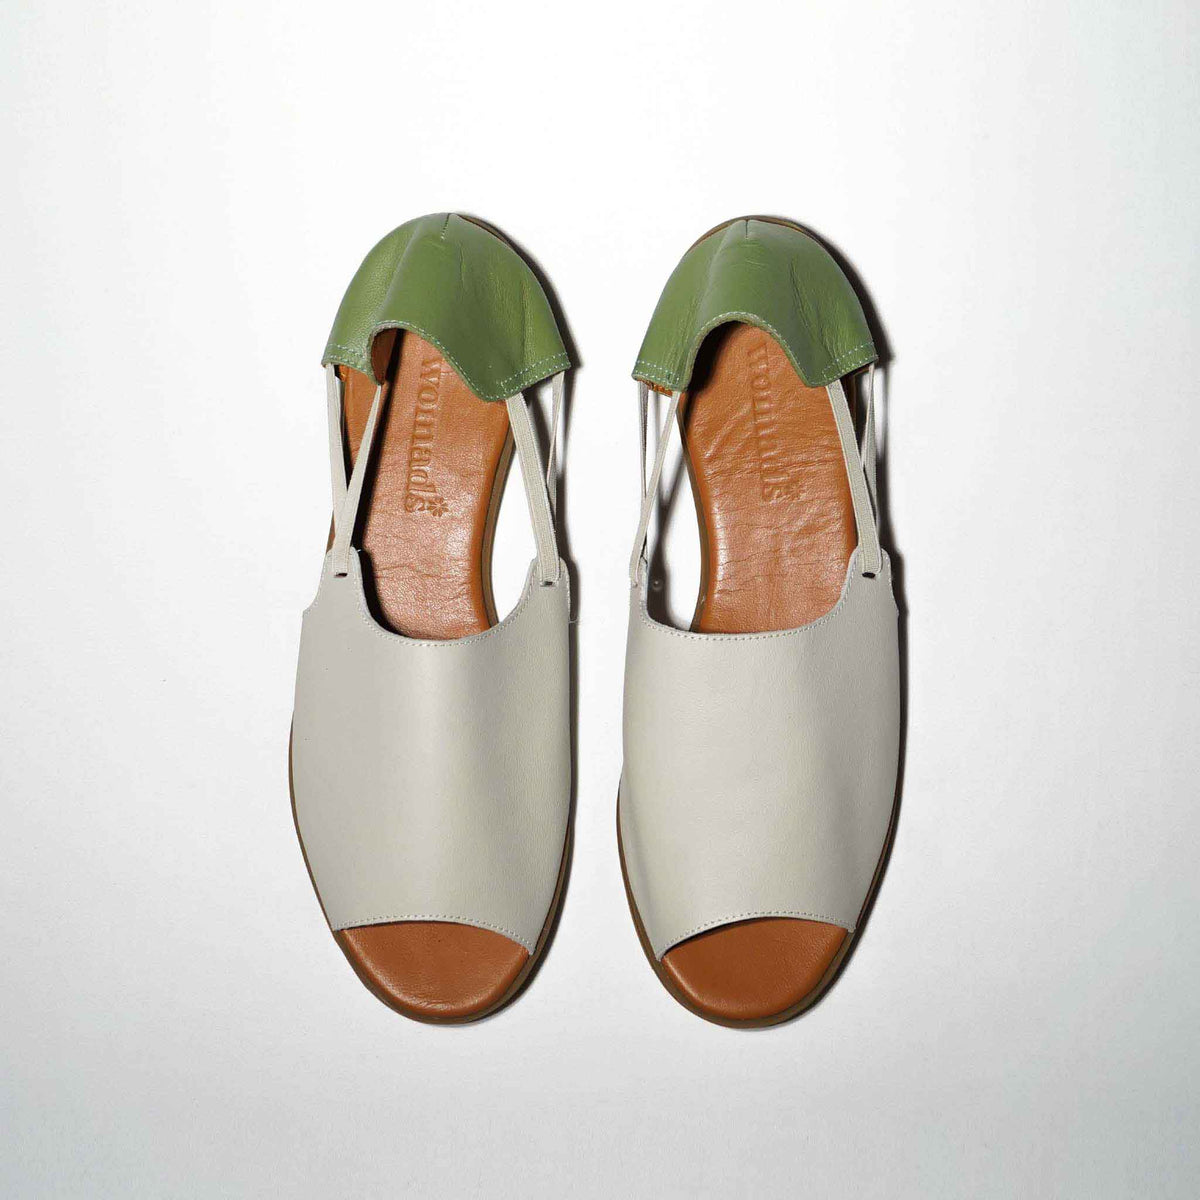 Womads green and cream sandals top view